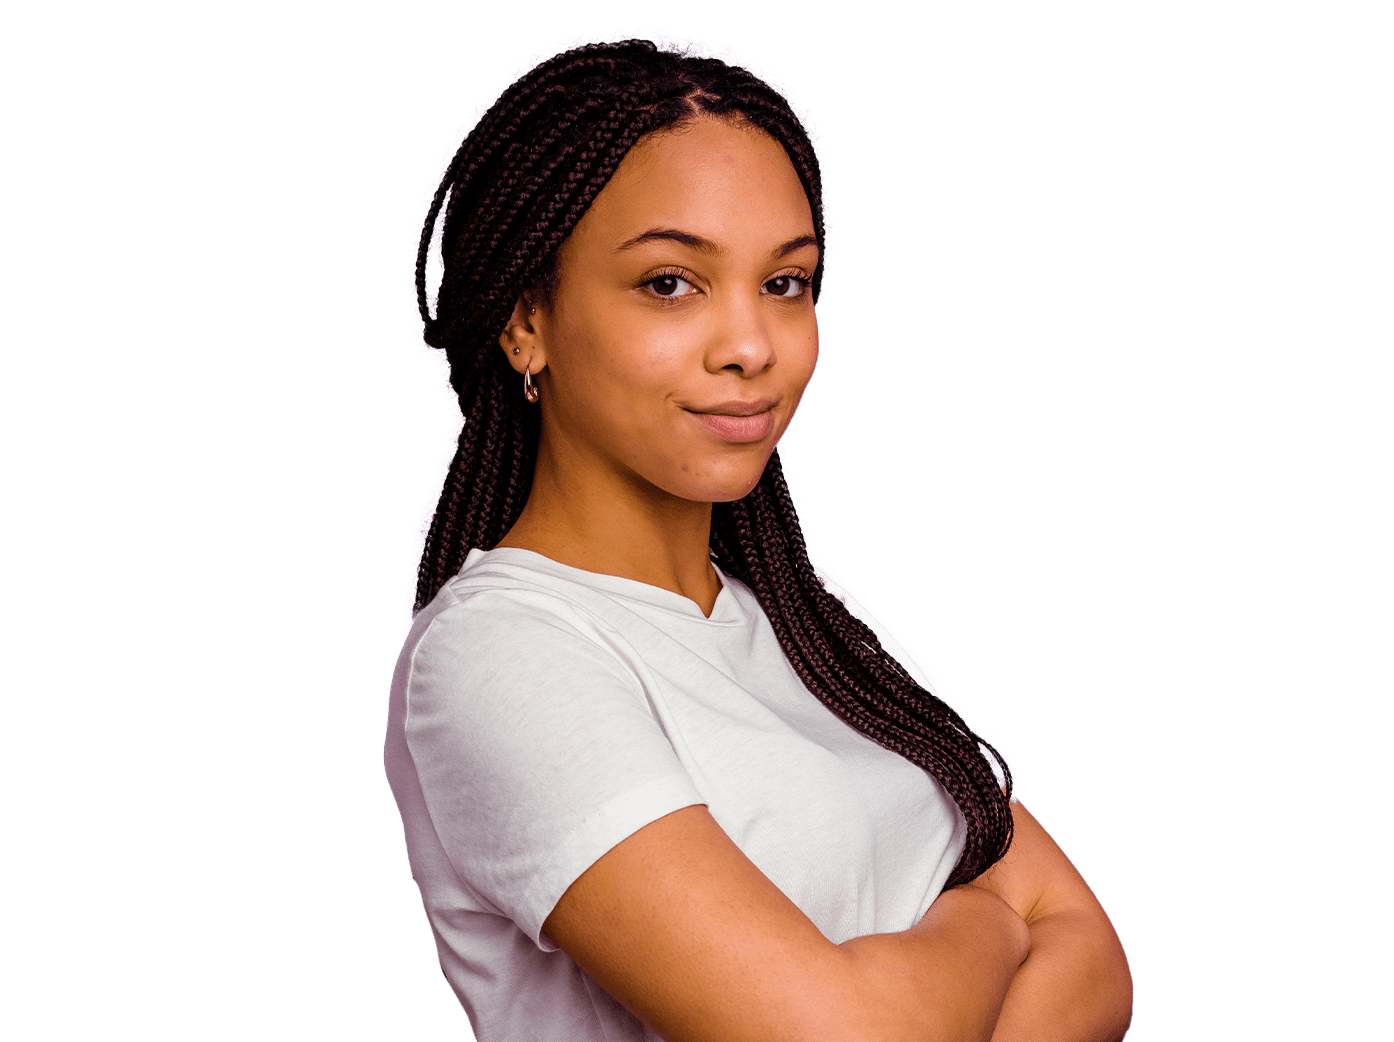 Young woman with braids in white shirt